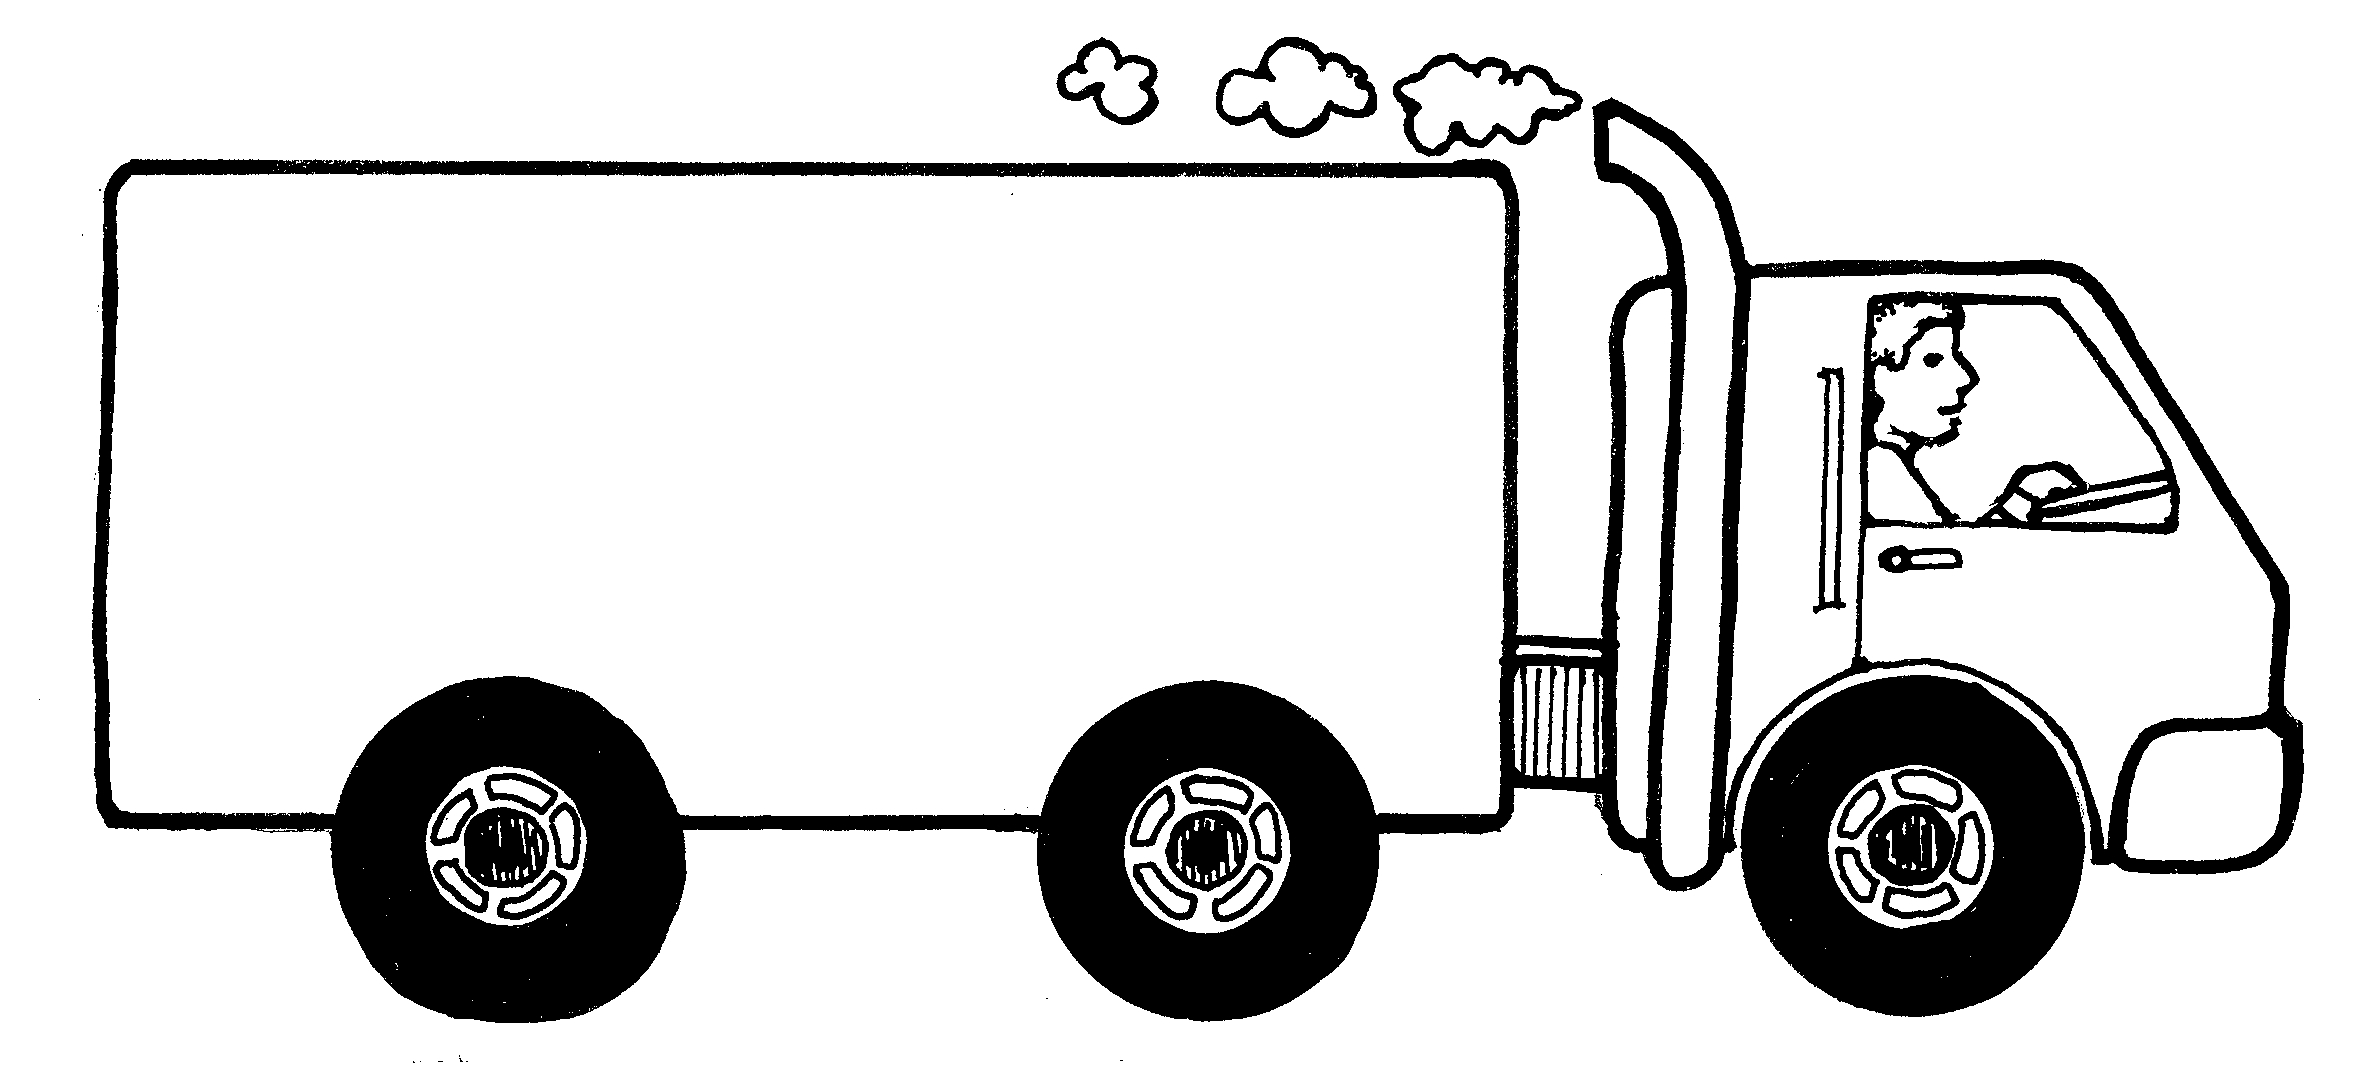 Moving truck clipart clipart 2 clipartcow